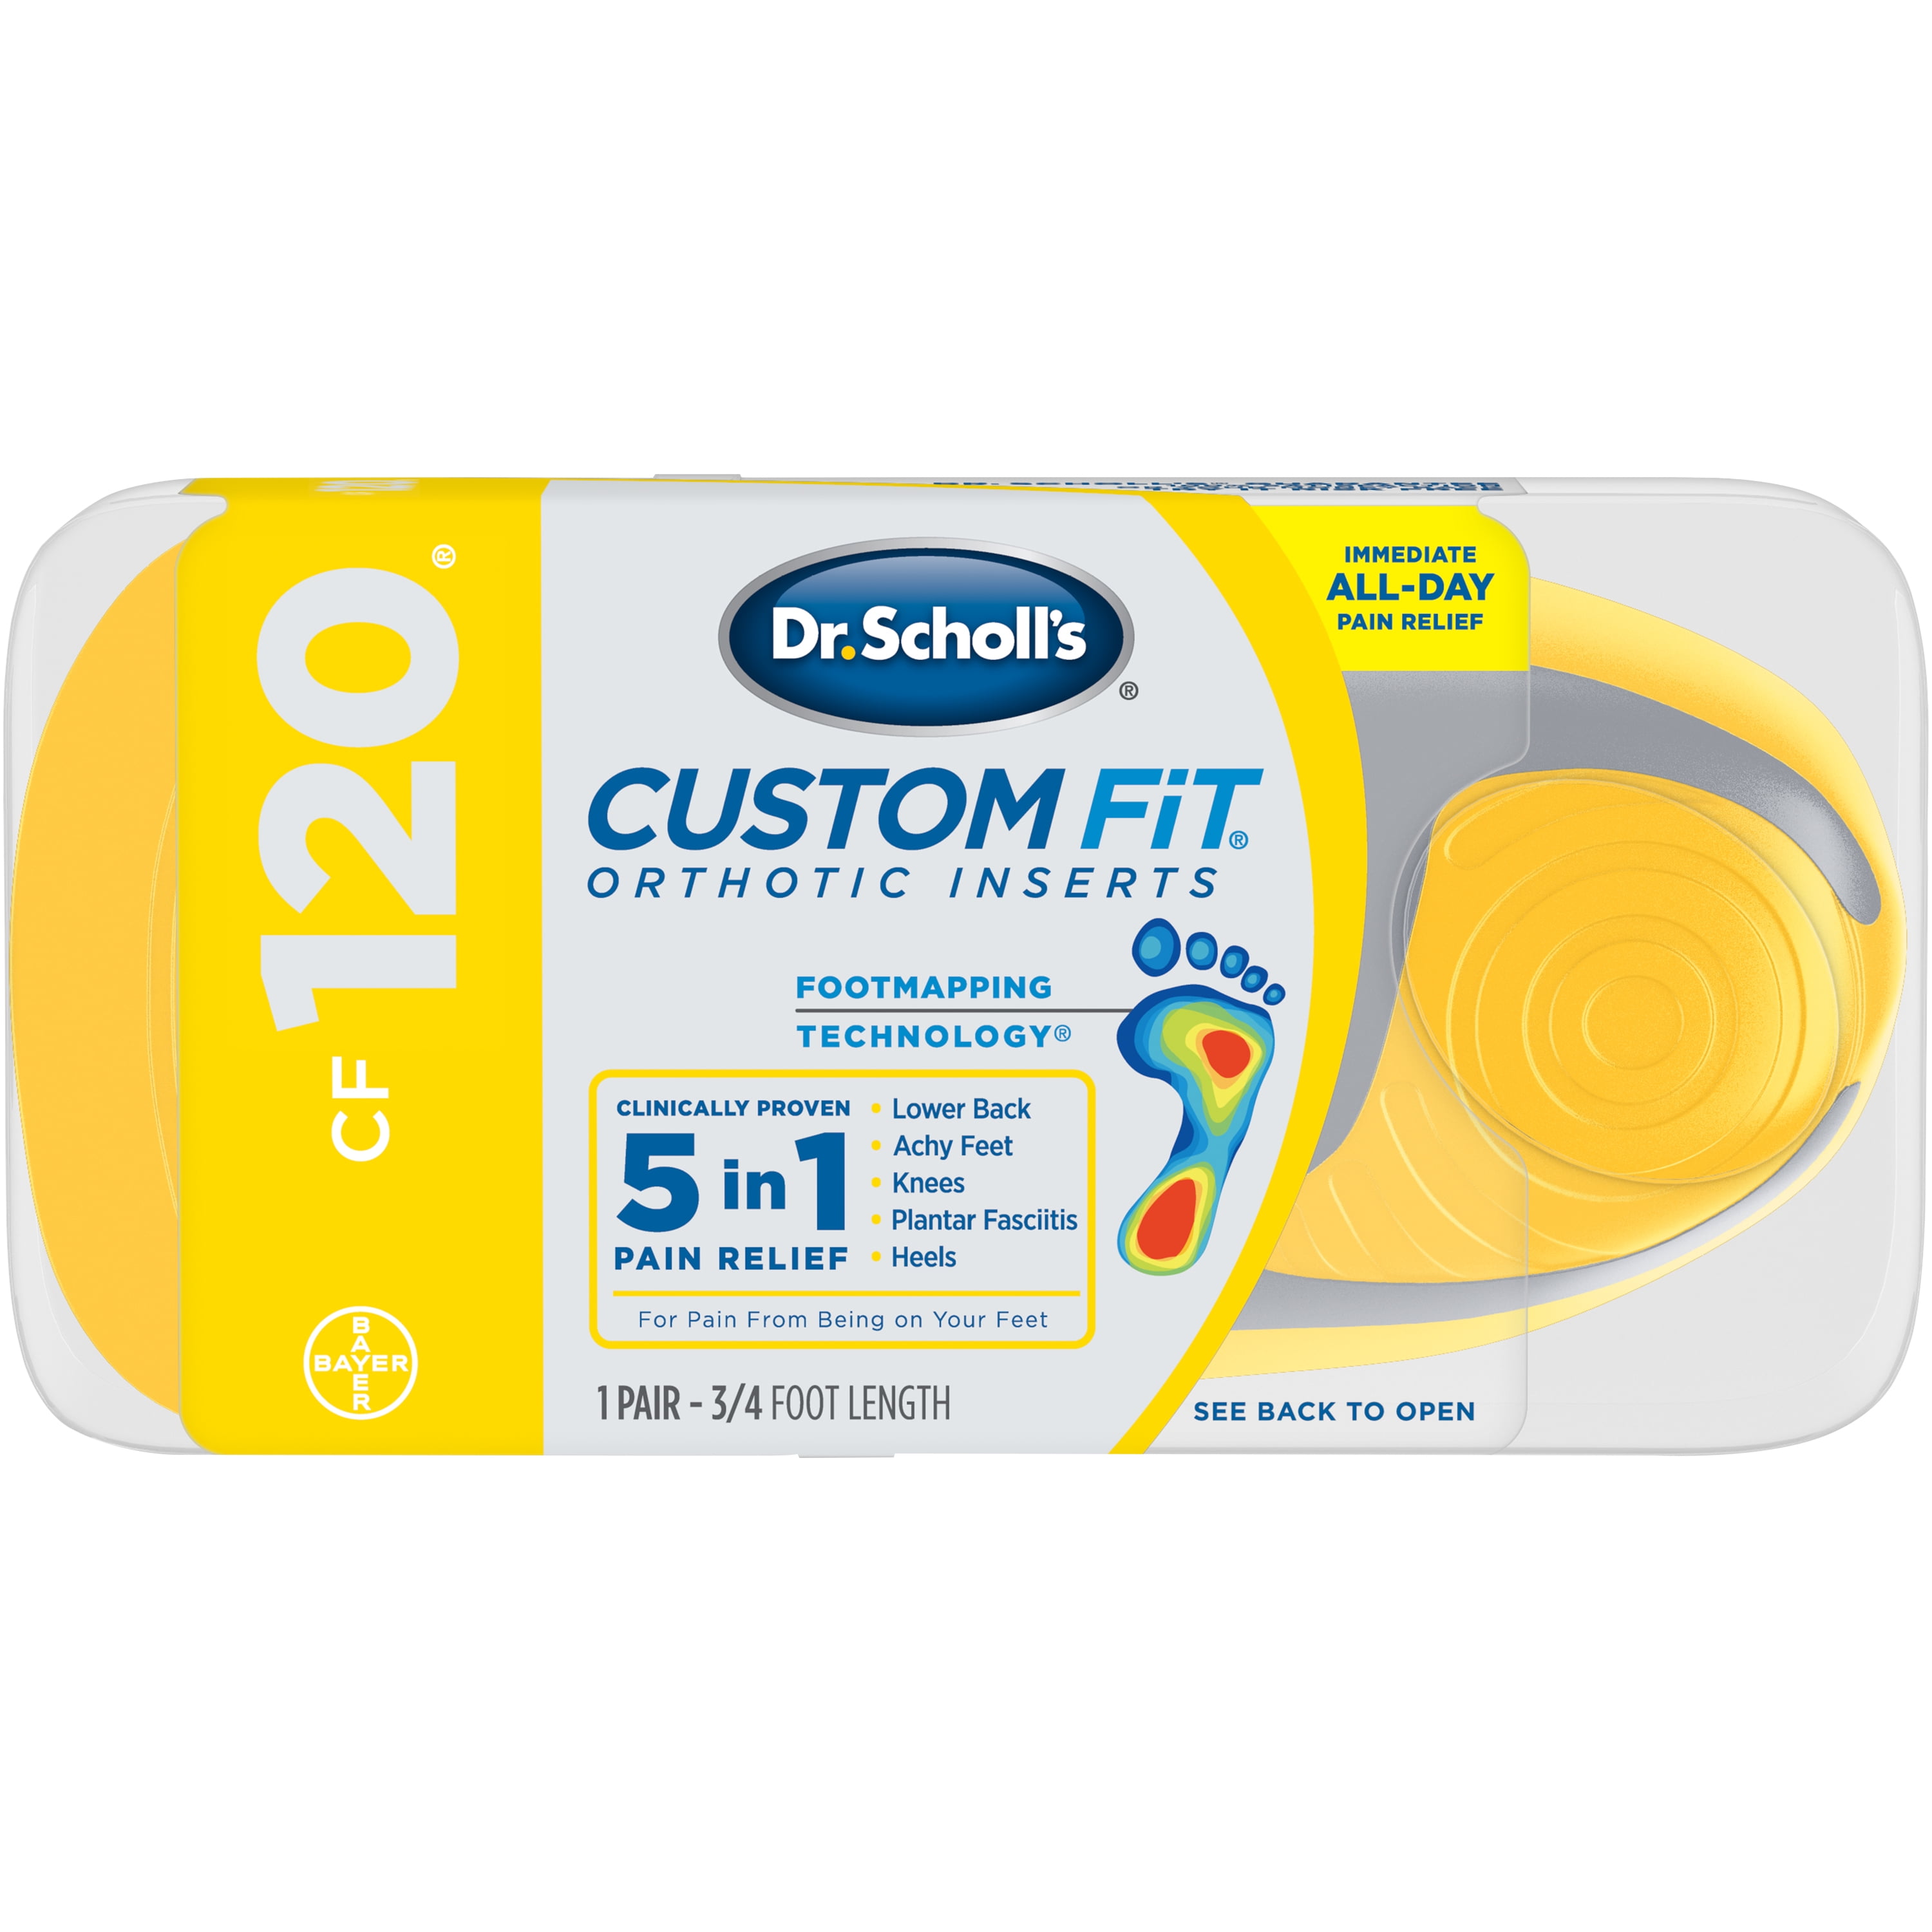 Dr. Scholl's Custom Fit Orthotic Inserts, CF 110 